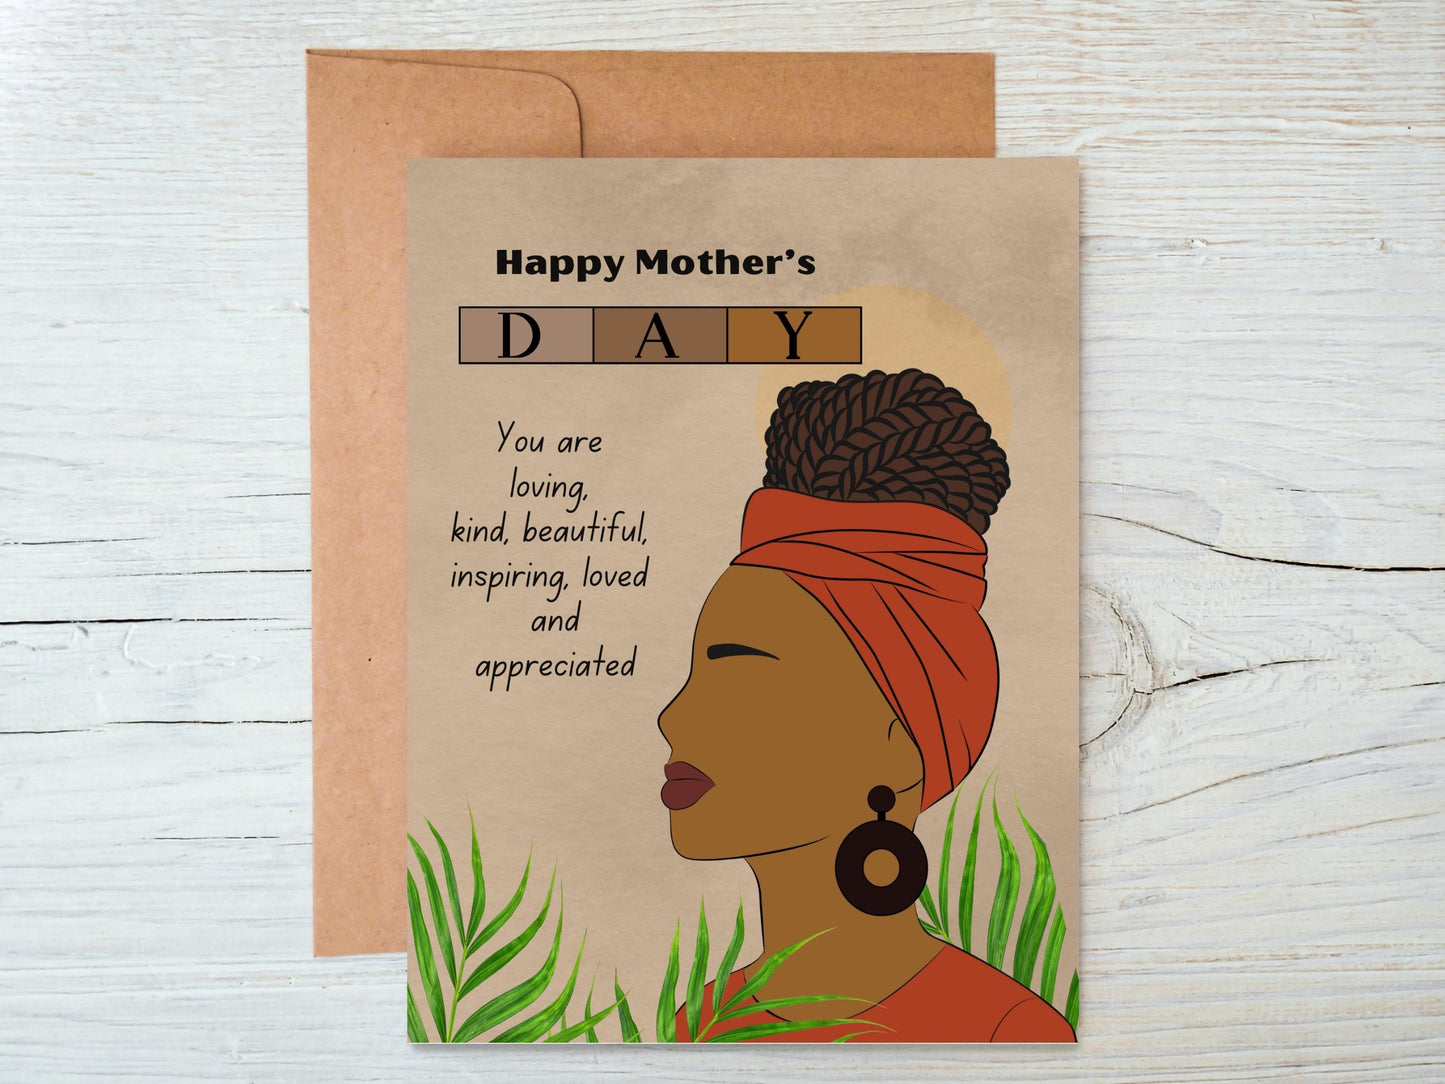 Black mothers day cards for African mother